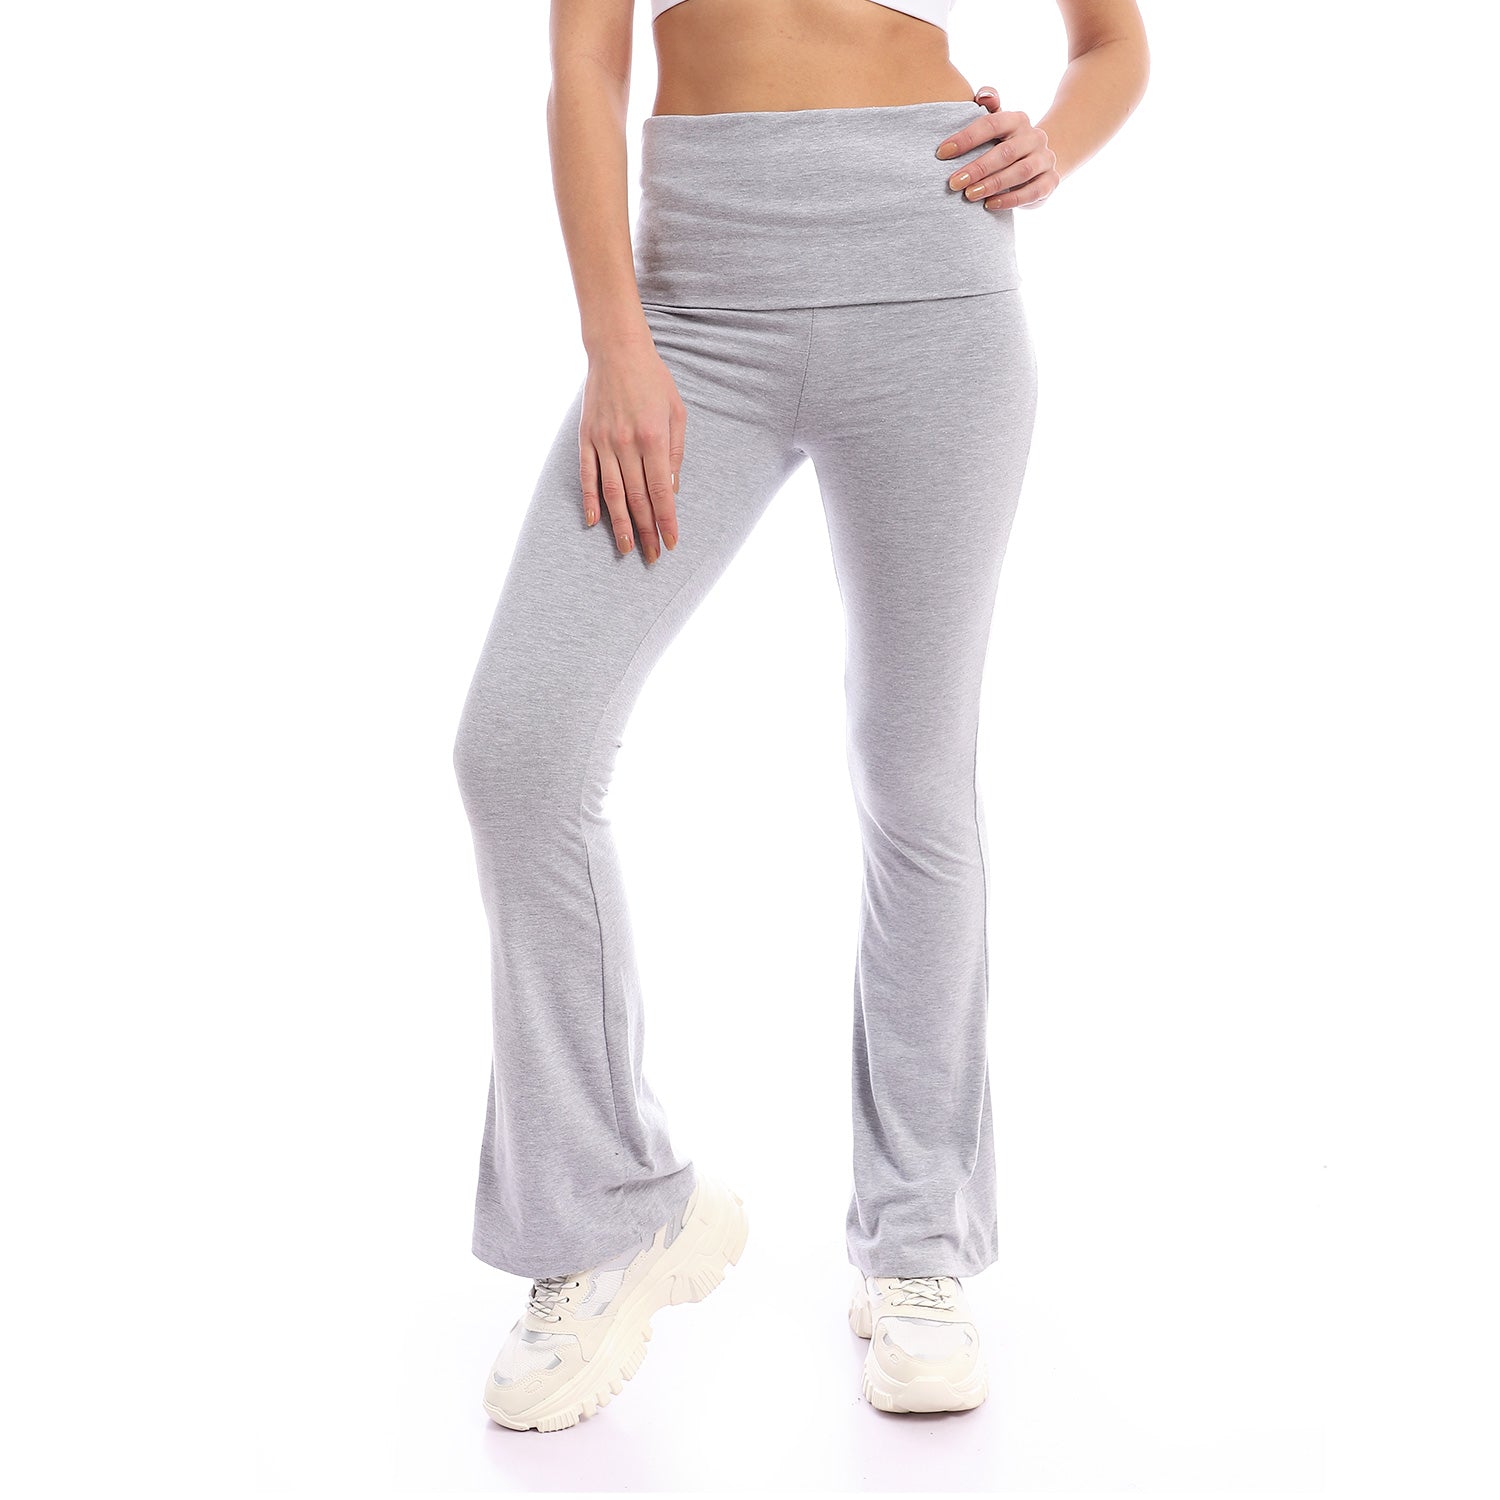 Modal Wide Leg Flow Pant - Black – Dharma Bums Yoga and Activewear